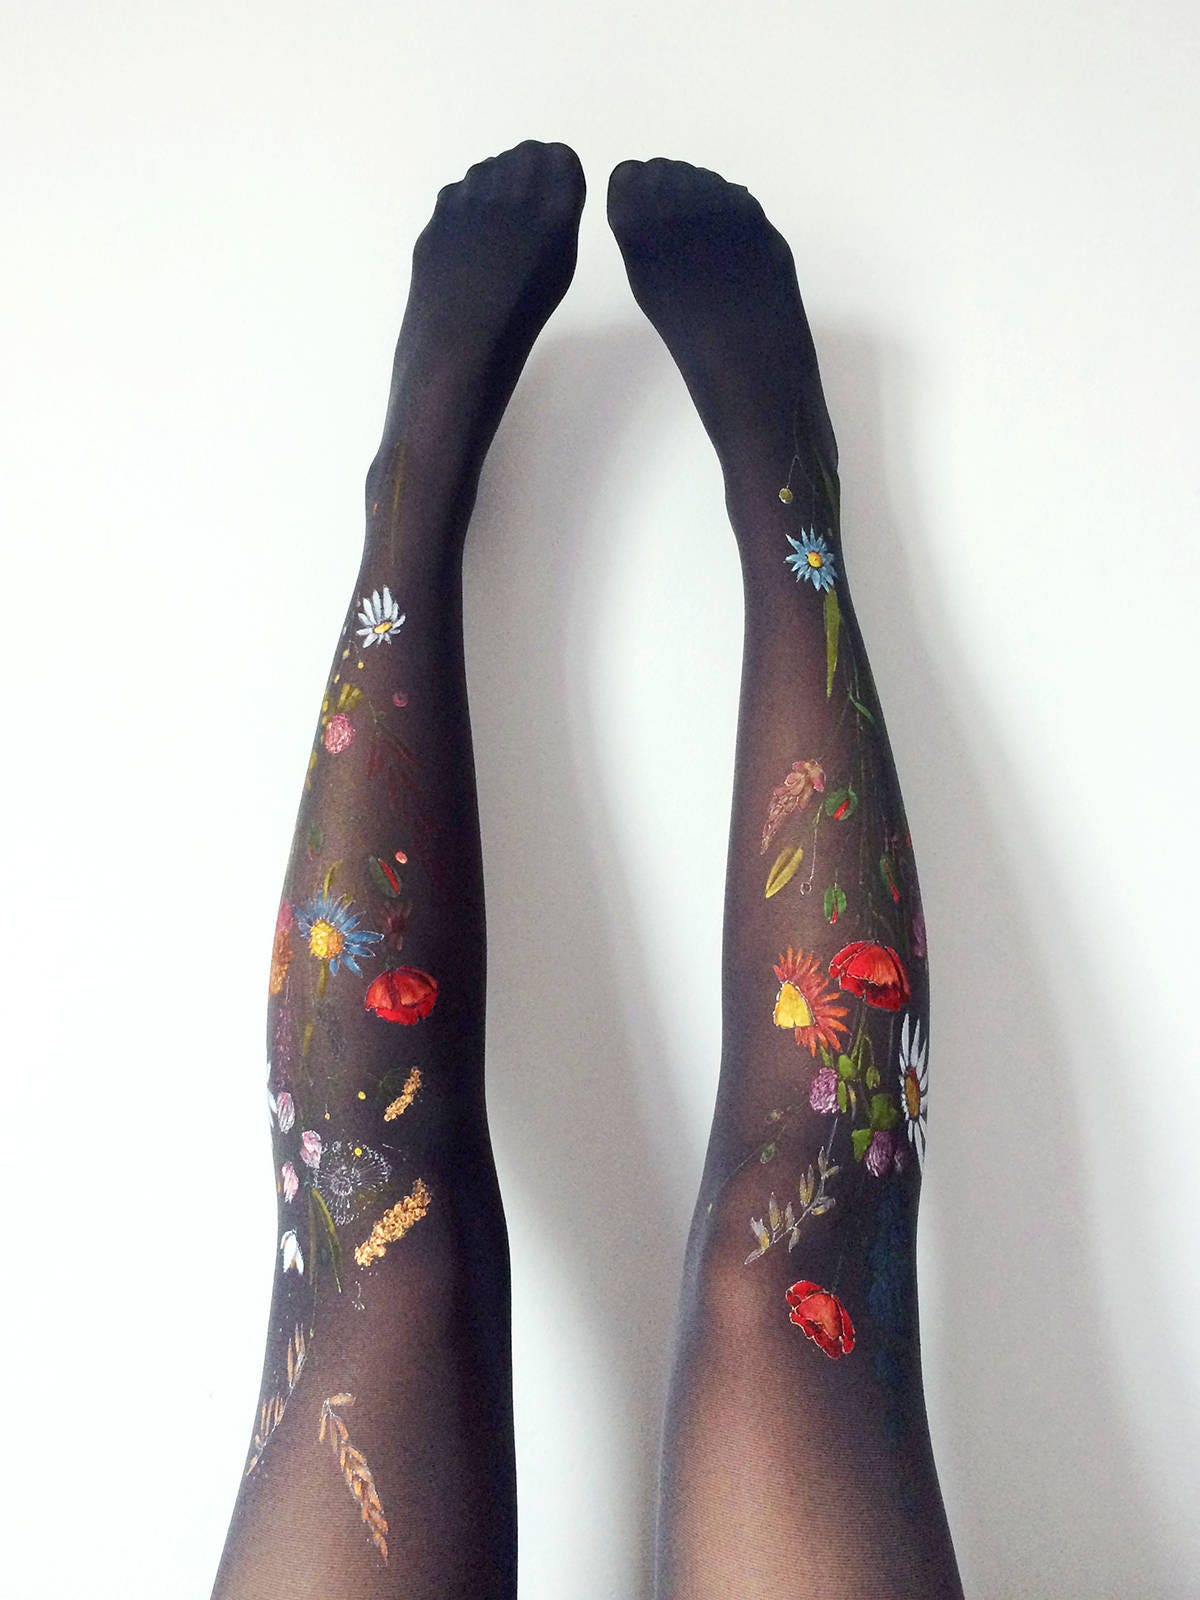 Floral Pattern Opaque Tights for Women. Hand Painted Daisies on Pantyhose. Floral  Tights for Wedding or a Unique Style 